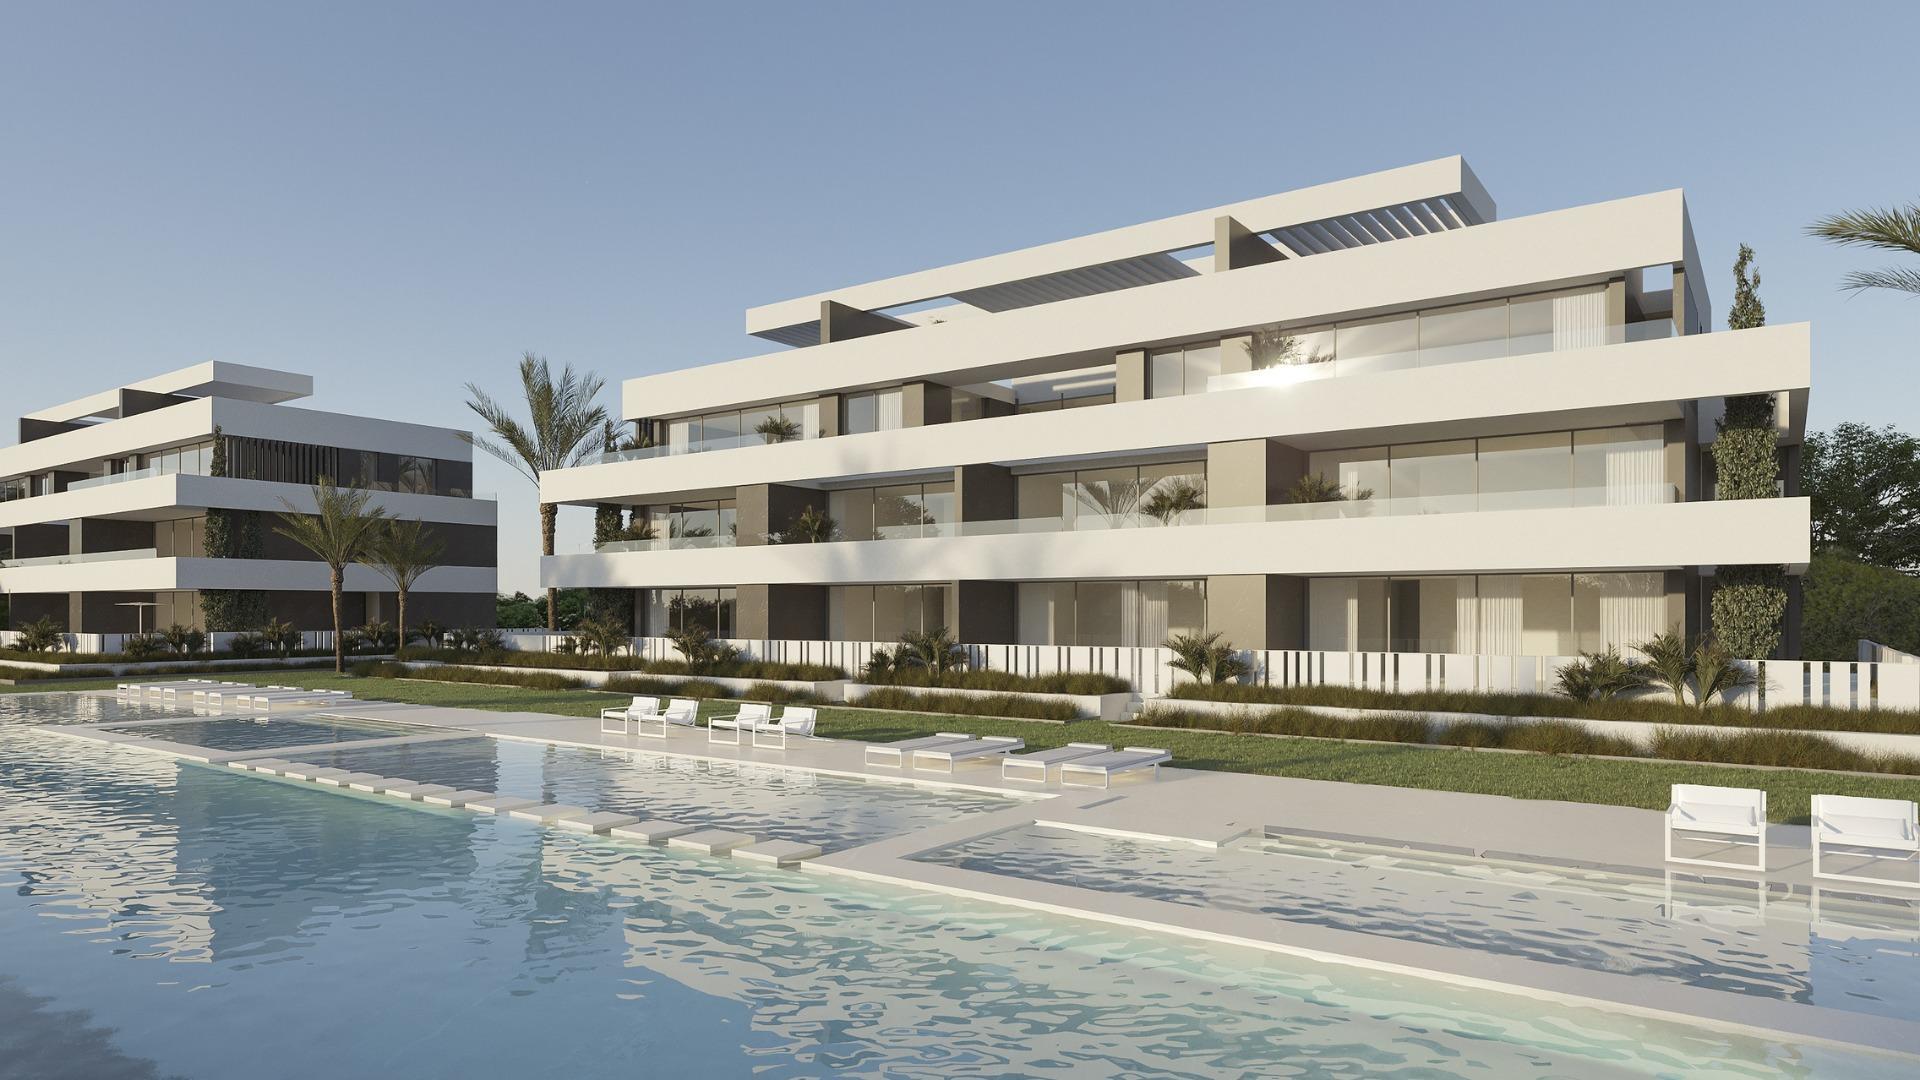 NEW BUILD RESIDENTIAL COMPLEX IN LA NUCIA

New Build residential complex of apartments and penthouses with outdoor communal pool, parking, storage room, lift, gym, communal spa with indoor heated pool, sauna, jacuzzi in La Nucia. 

Modern properties with 2 and 3 bedrooms, all with 2 bathrooms, open plan kitchen with spacious living room, fitted wardrobes, terrace, underground parking space.
Penthouses has private solariums.

Excellence in its avant-garde architecture, exquisite finishes and high-end services, a dream urbanization for those looking for the highest level of comfort and distinction.

Interiors that combine elegant design and modern sophistication, create spaces that turn every day into an exceptional experience of comfort and well-being.

German designer kitchen, Burger or similar, with Silestone worktop, fully equipped. Siemens appliances or similar. Induction hob, extractor fan, oven and fridge and dishwasher integrated in the units. 
Reinforced access door to the property with security lock finished with lacquered panelling to match the interior carpentry. Option to fit lock with remote control from smartphone or tablet.
Modular wardrobes with hinged or sliding doors lacquered to match the rest of the carpentry, including boot, drawers and hanging rail.
The property will be prepared to be able to contract high speed internet. 
There will be low consumption electric underfloor heating in the bathrooms. 
The video intercom will be electronic with colour image and will have integrated remote control from telephone or tablet. 
Samsung air conditioning. Each room will have its own interior machine and independent control. The air conditioning will have remote control. It can be controlled from a telephone or tablet. 
The complete installation of the Air Conditioning System will be carried out, equipped with a heat pump to provide both cooling and heating. Ducts made of fibreglass will also be used. 
The indoor units will be located in the false ceiling in the bathrooms and corridor area, while the outdoor unit will be installed in the area assigned in the project. Ventilation. Installation of interior air renewal in dwellings with extraction outlets in bathrooms and kitchen and clock for programming the timetable. 
Swimming pool for community use with saline chlorination and automatic control of PH and chlorine. 
In the basement there will be a gymnasium, indoor heated pool, jacuzzi, sauna, steam bath, chromotherapy and changing rooms with bathrooms. 
Large terrace areas and gardens with indigenous plants for multiple uses in the communal area. 
The perimeter of the plot will be planted with plants that will create a private atmosphere in the enclosure as they grow. 
There will be a video surveillance system for the communal areas. 

Located in a privileged location, between Nucia and Altea this residencial enjoys an exceptional environment and excellent services within the urbanization.